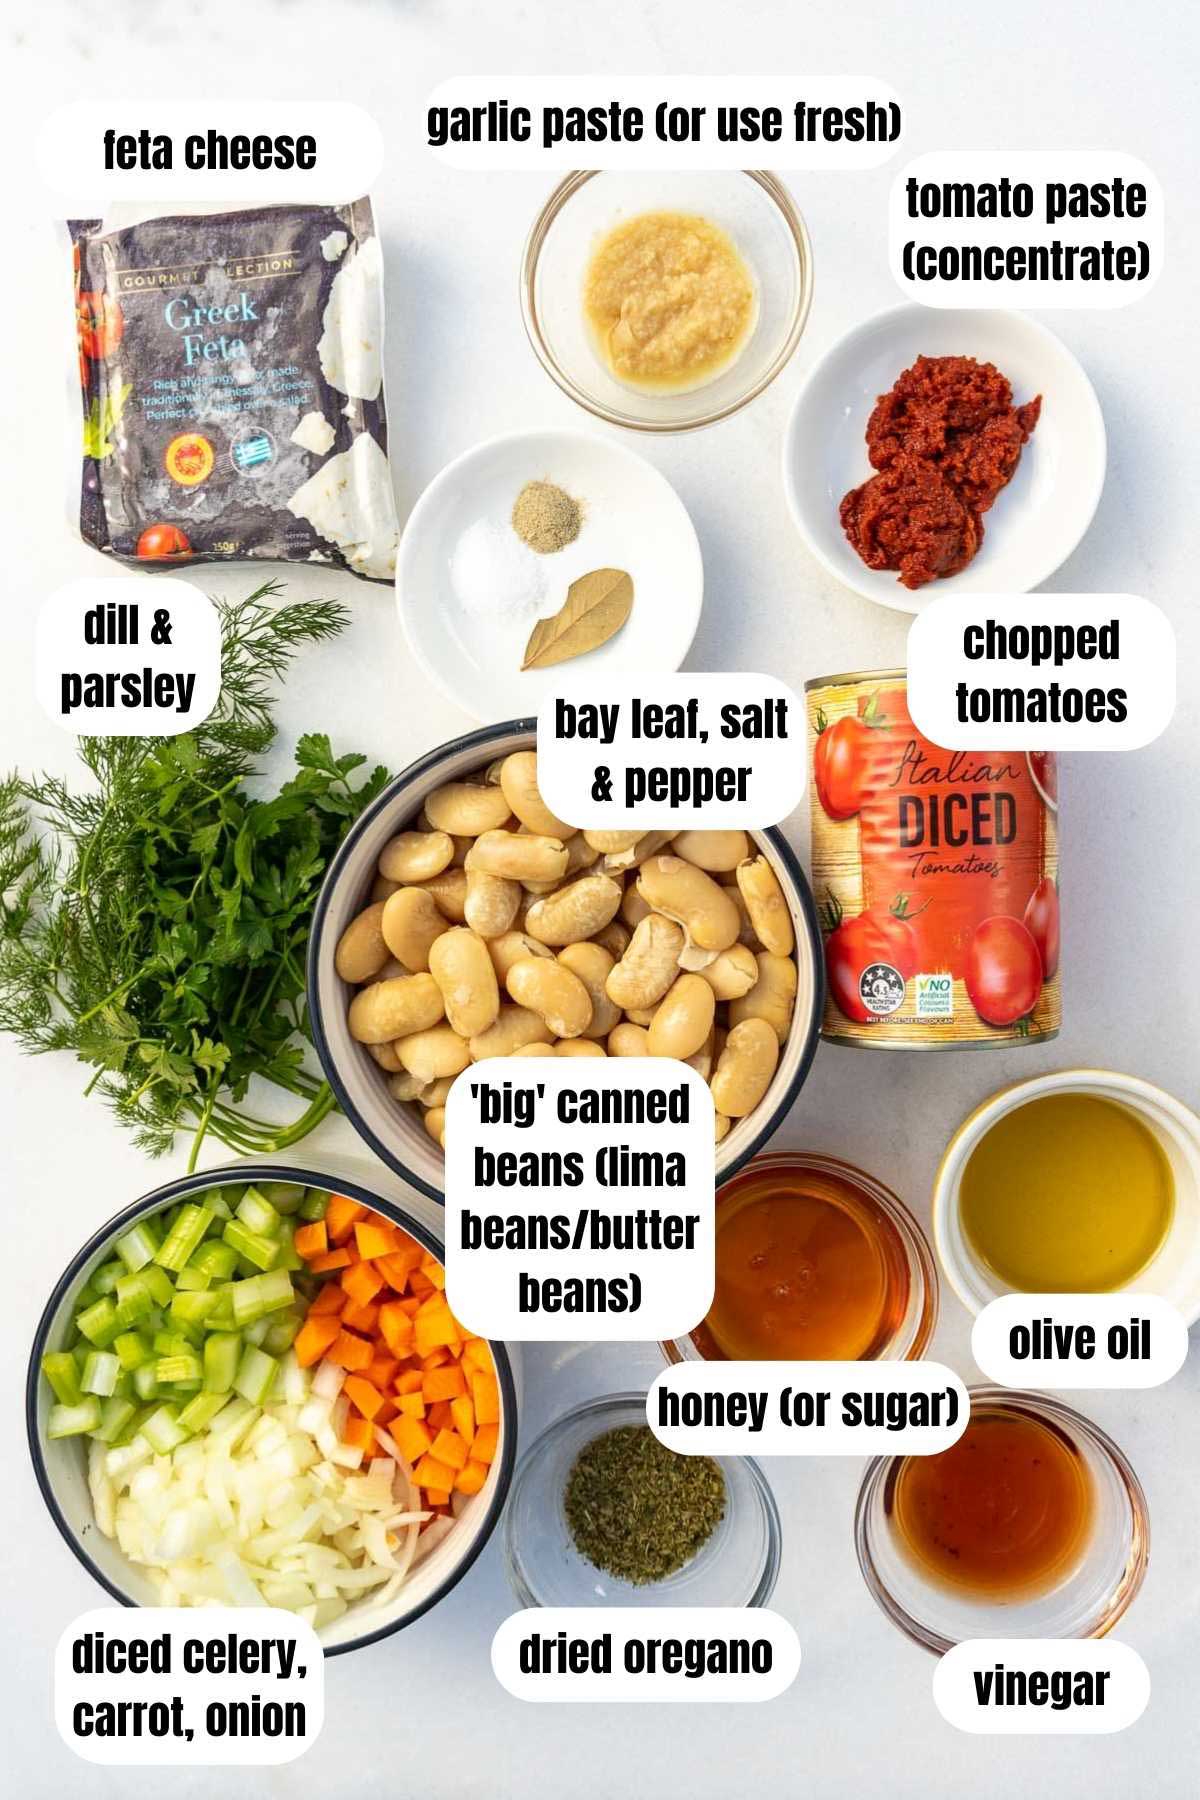 An overhead view of all the ingredients needed to make quick Greek giant beans including chopped onion, carrot and celery, dried oregano, garlic paste, vinegar, honey, olive oil, canned lima or butter beans, chopped tomatoes, tomato paste, salt, pepper and a bay leaf, feta cheese, and fresh dill and parsley.